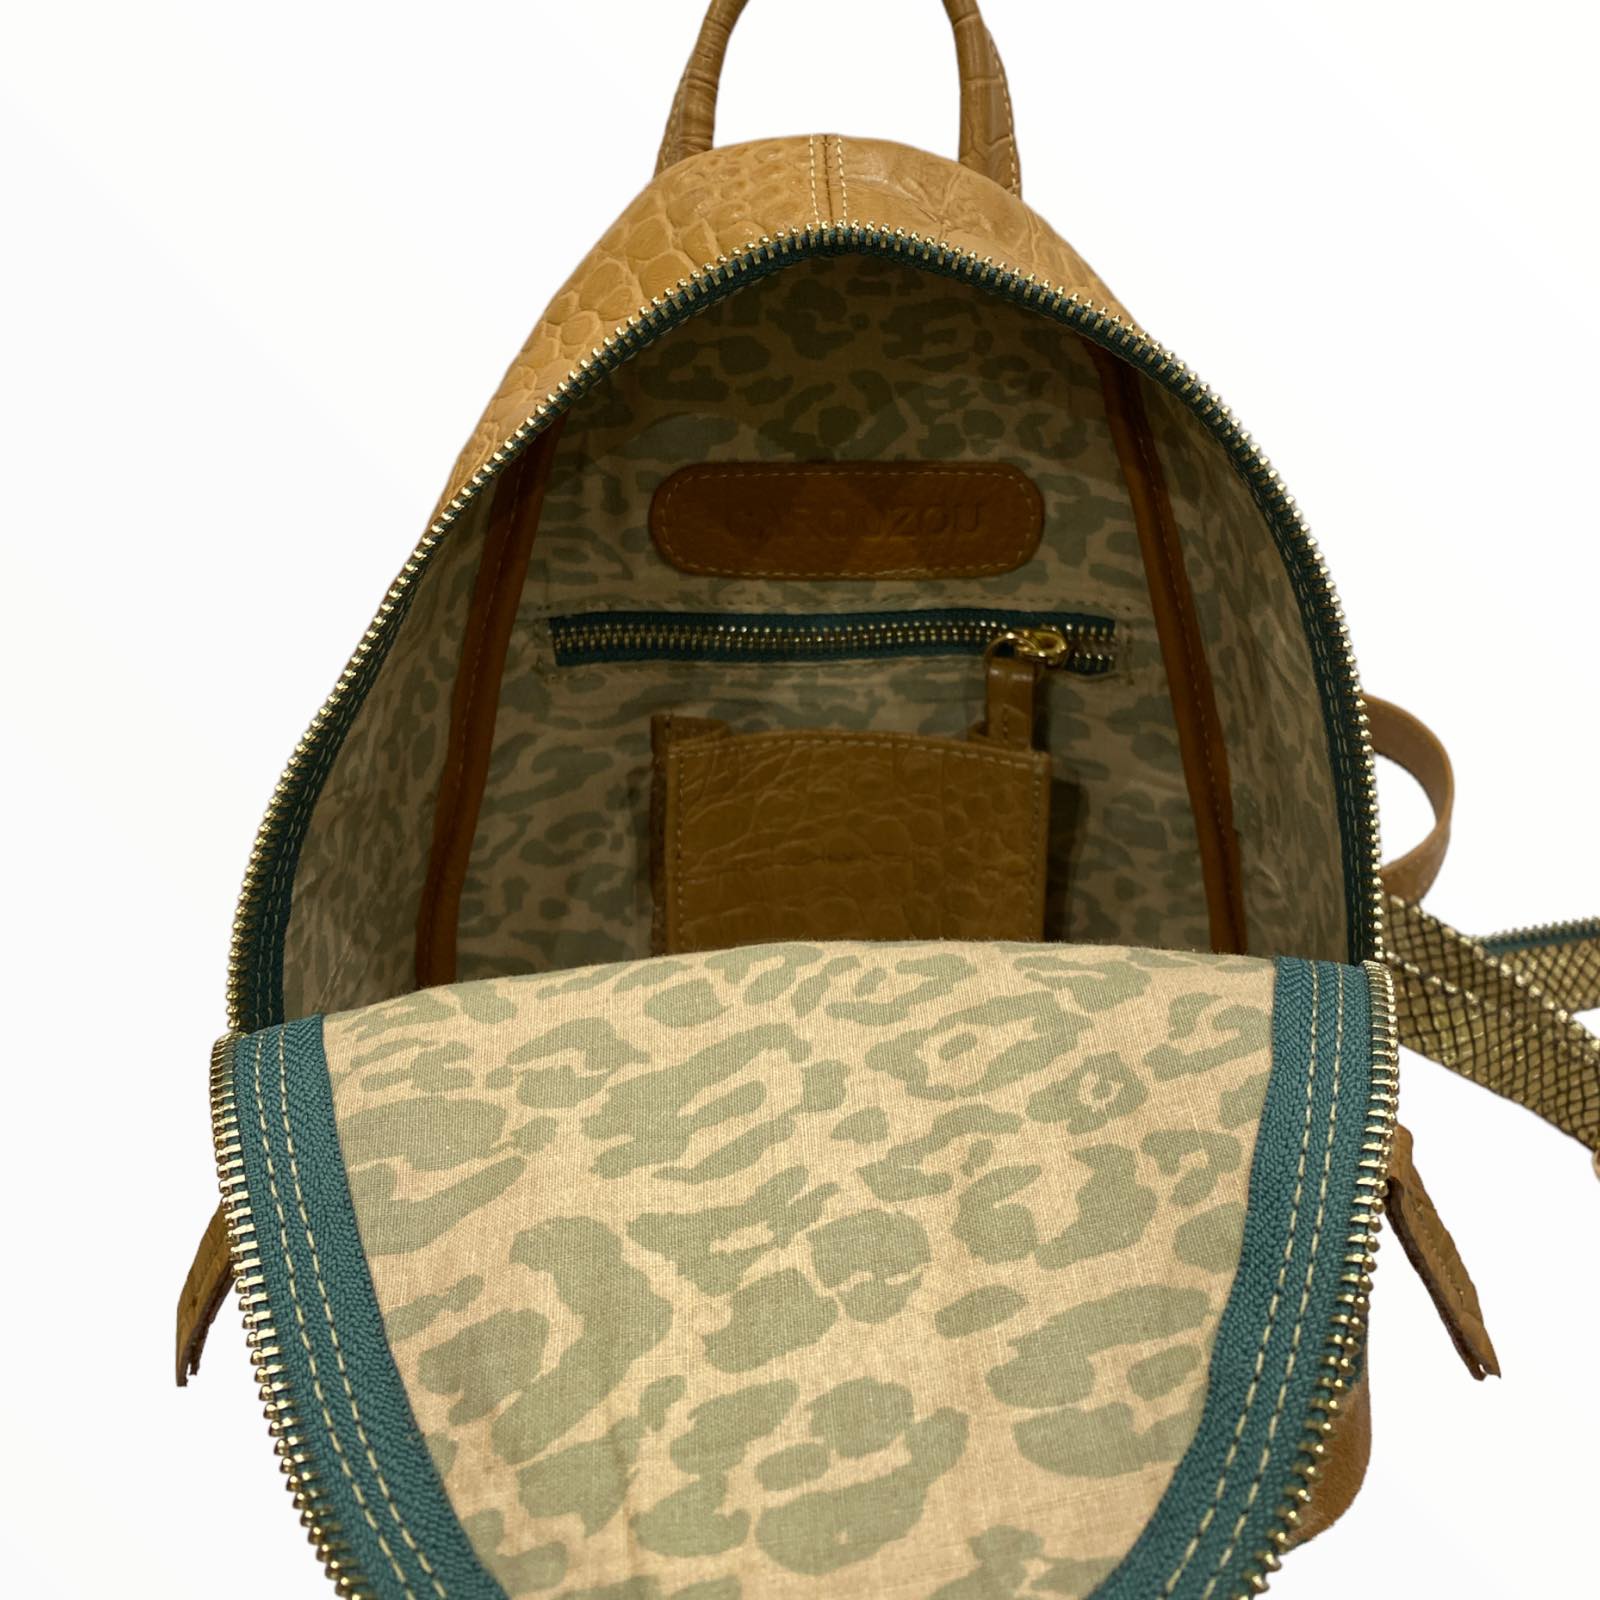 Agapi small. Camel backpack with calf-hair details.